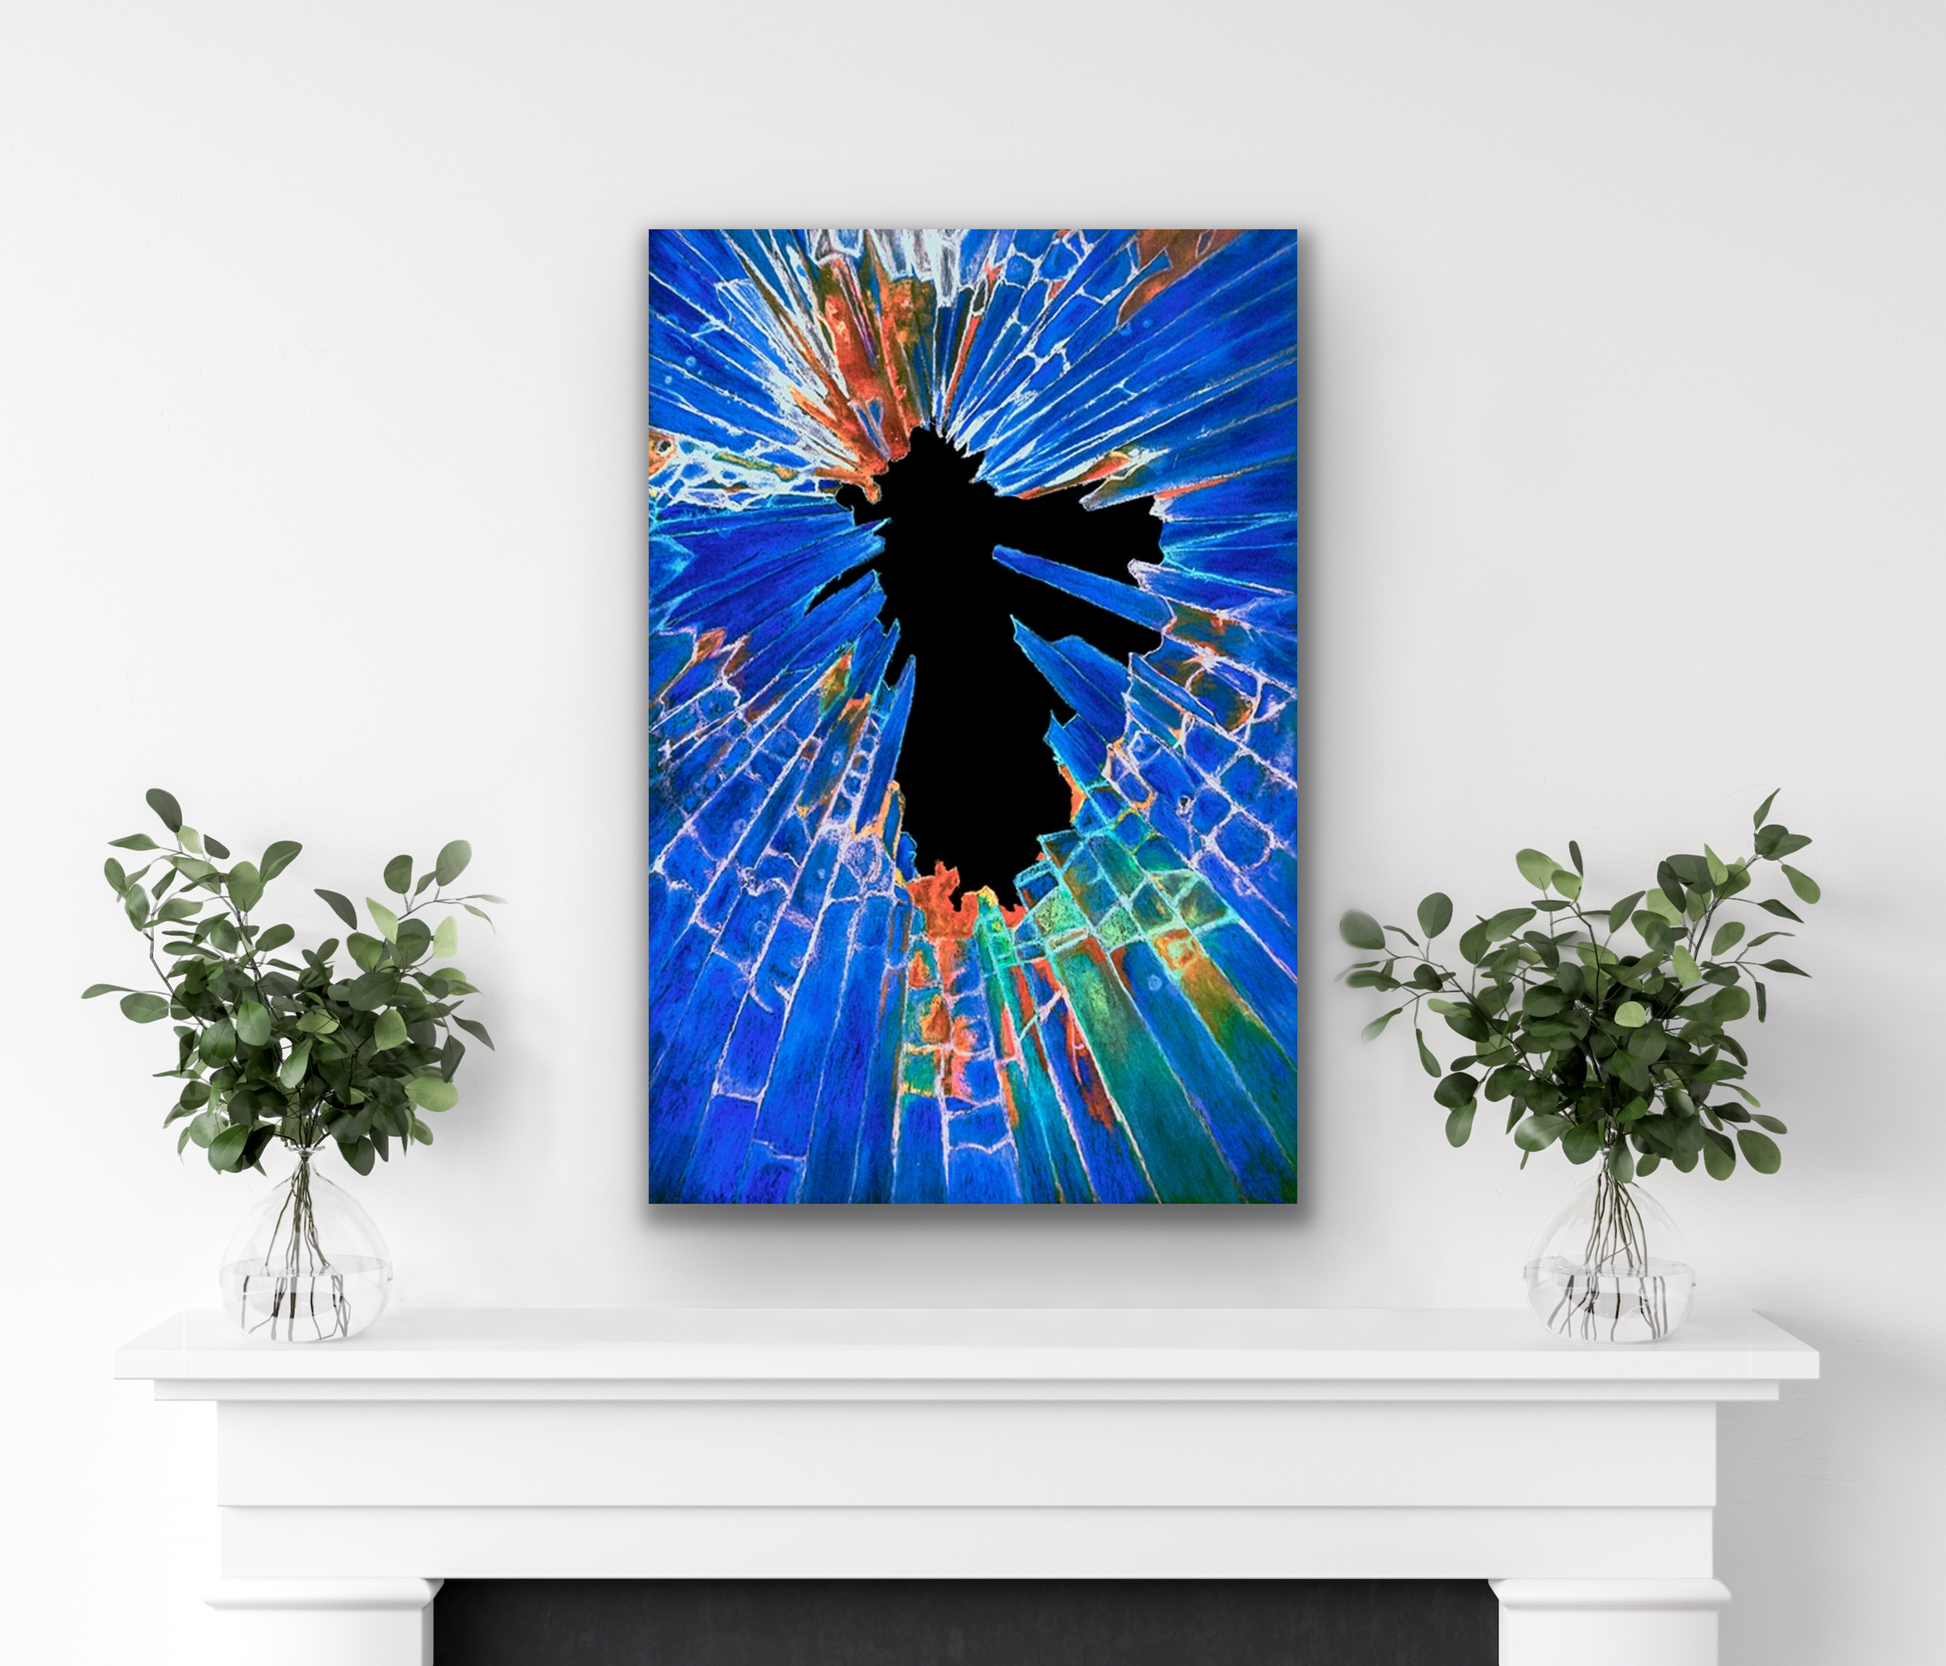 "The Shattering" artwork will make a stunning statement in your living room.